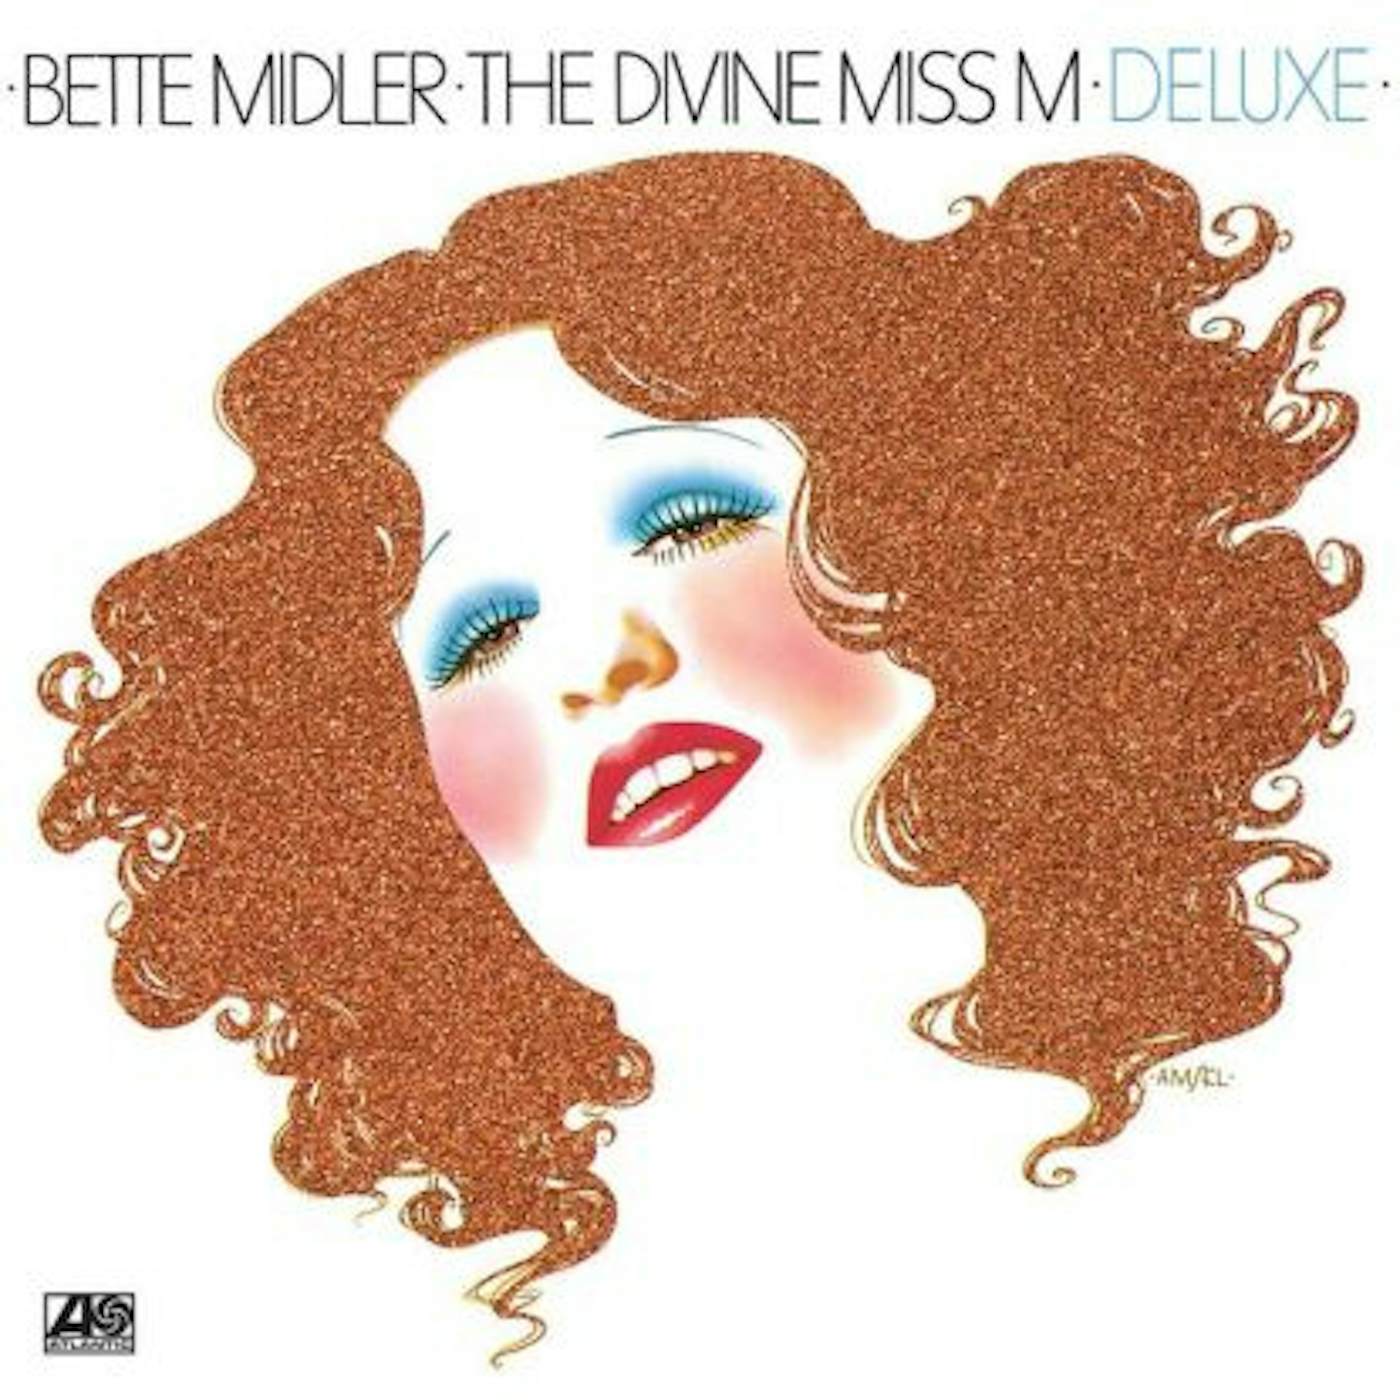 Bette Midler The Divine Miss M (Deluxe)